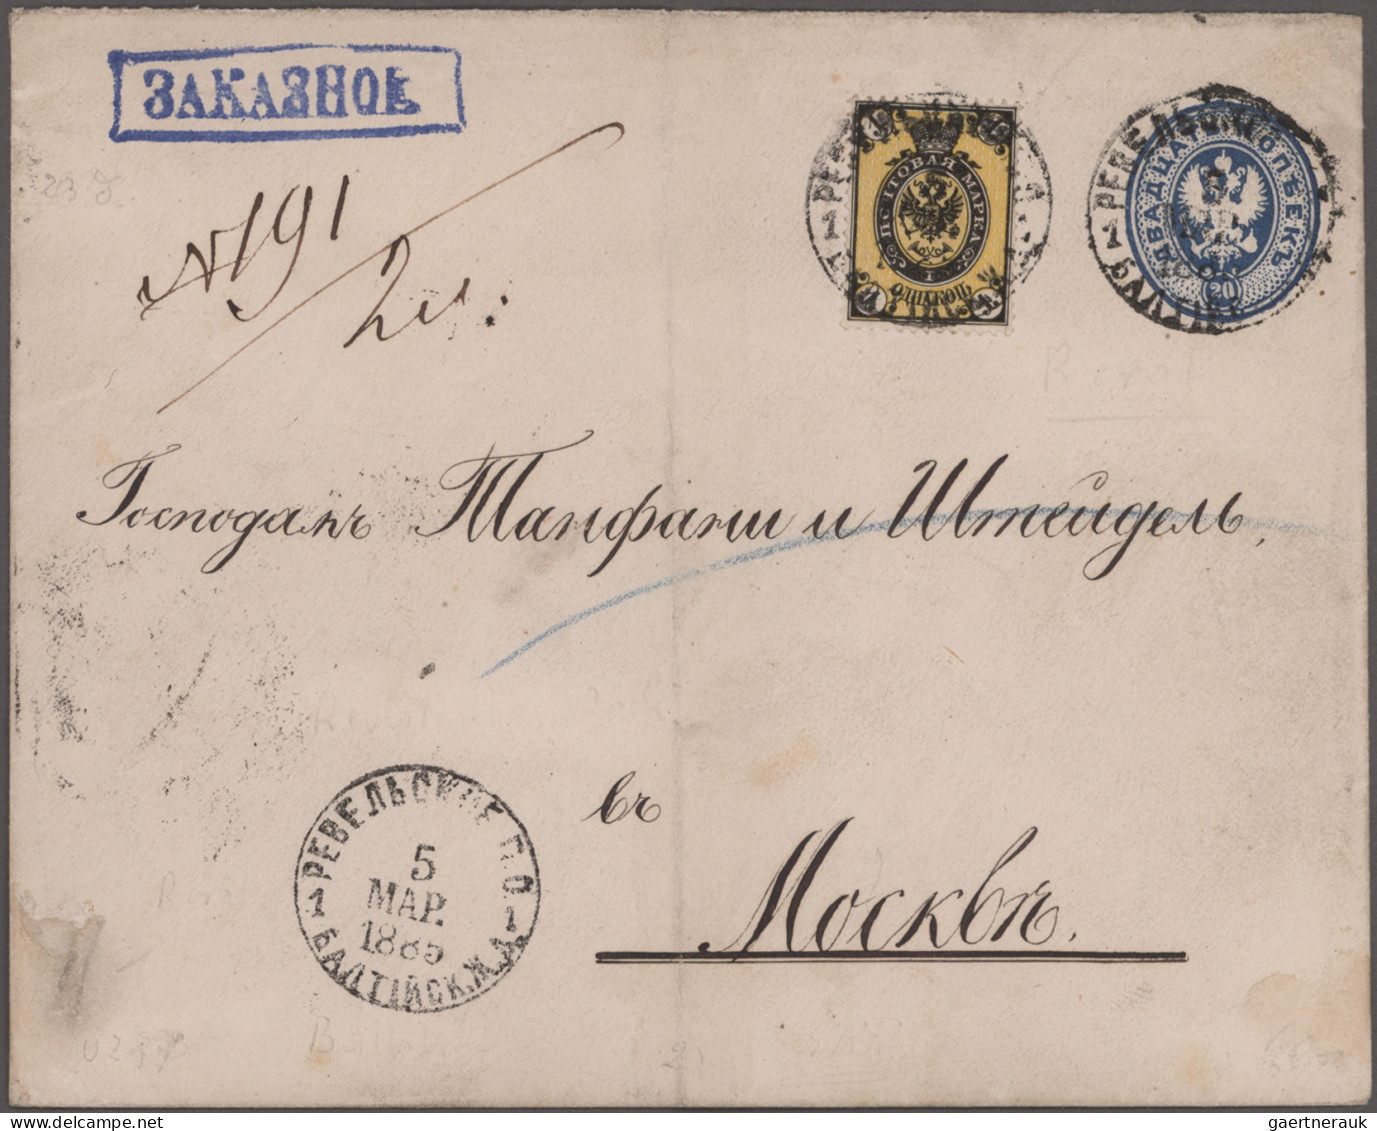 Russia: 1850/1910's: Collection of 33 postal stationery envelopes and cards, all